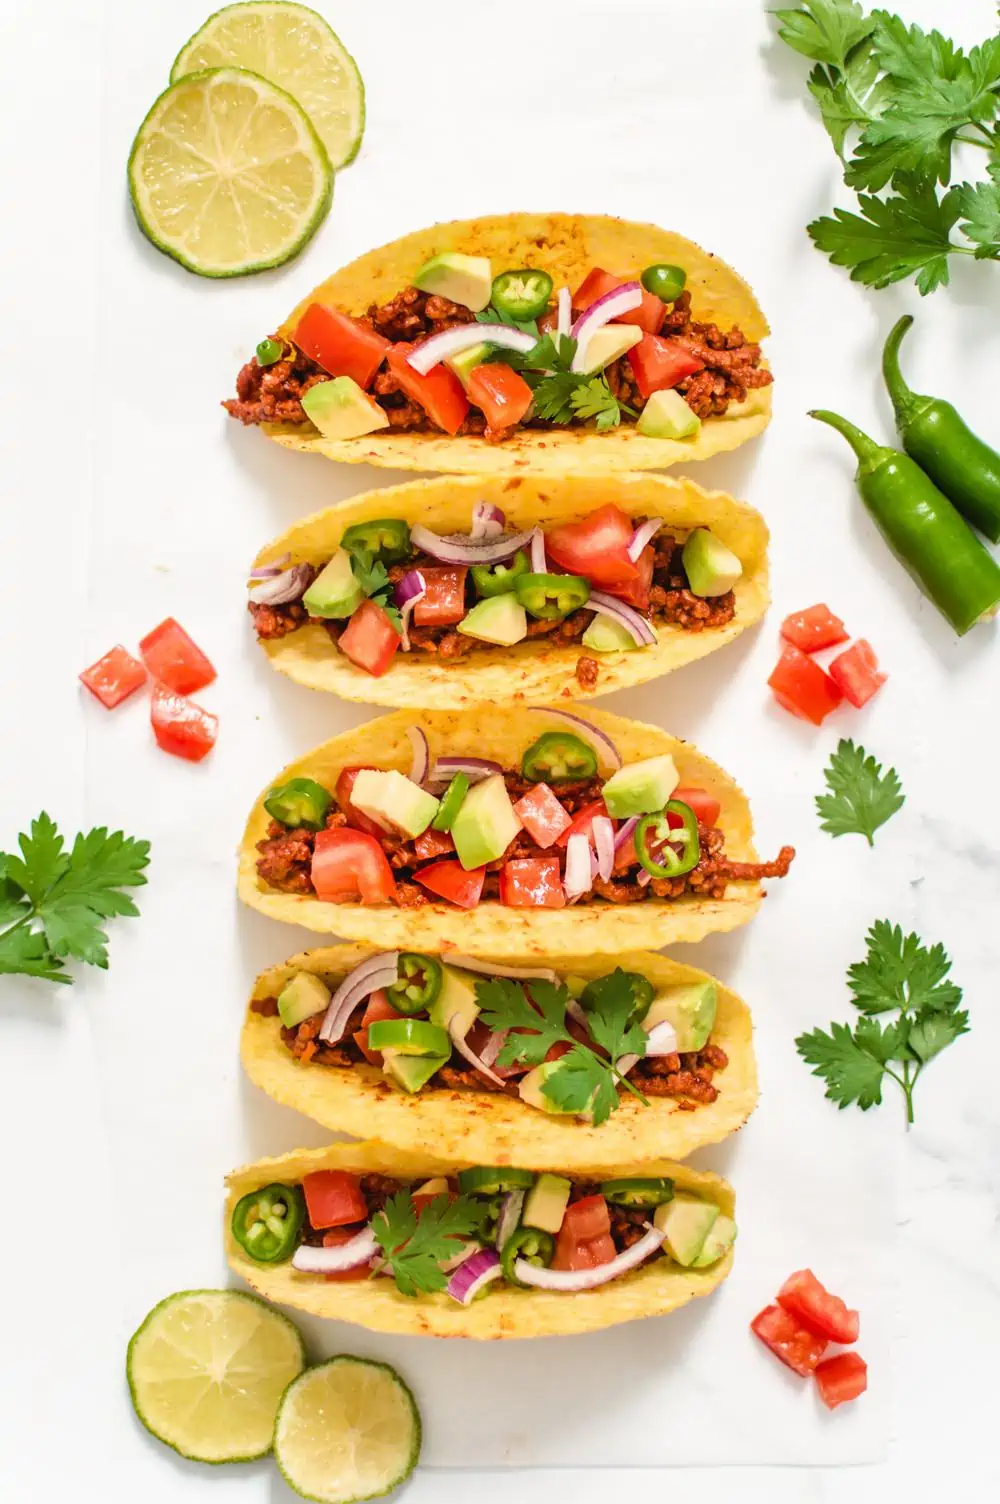 Beefy Lover's Vegan Tacos in crunchy shells surrounded by various toppings.